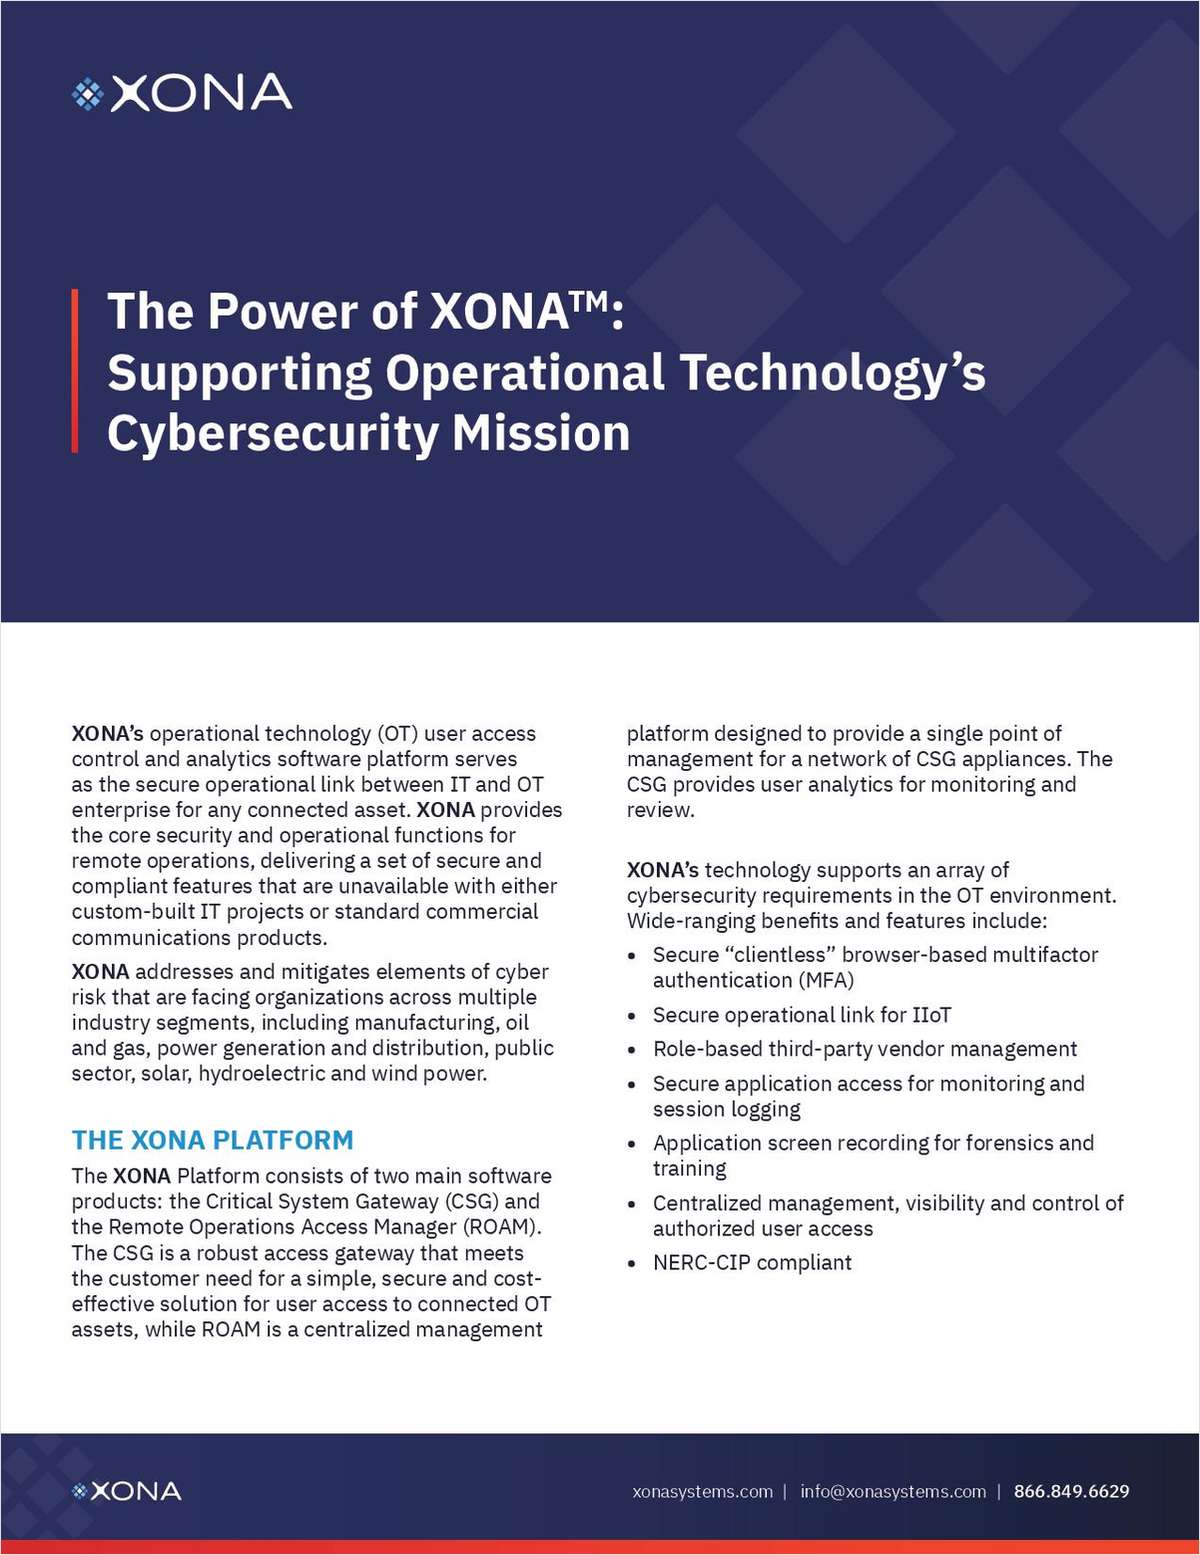 Supporting Operational Technology's Cybersecurity Mission with XONA